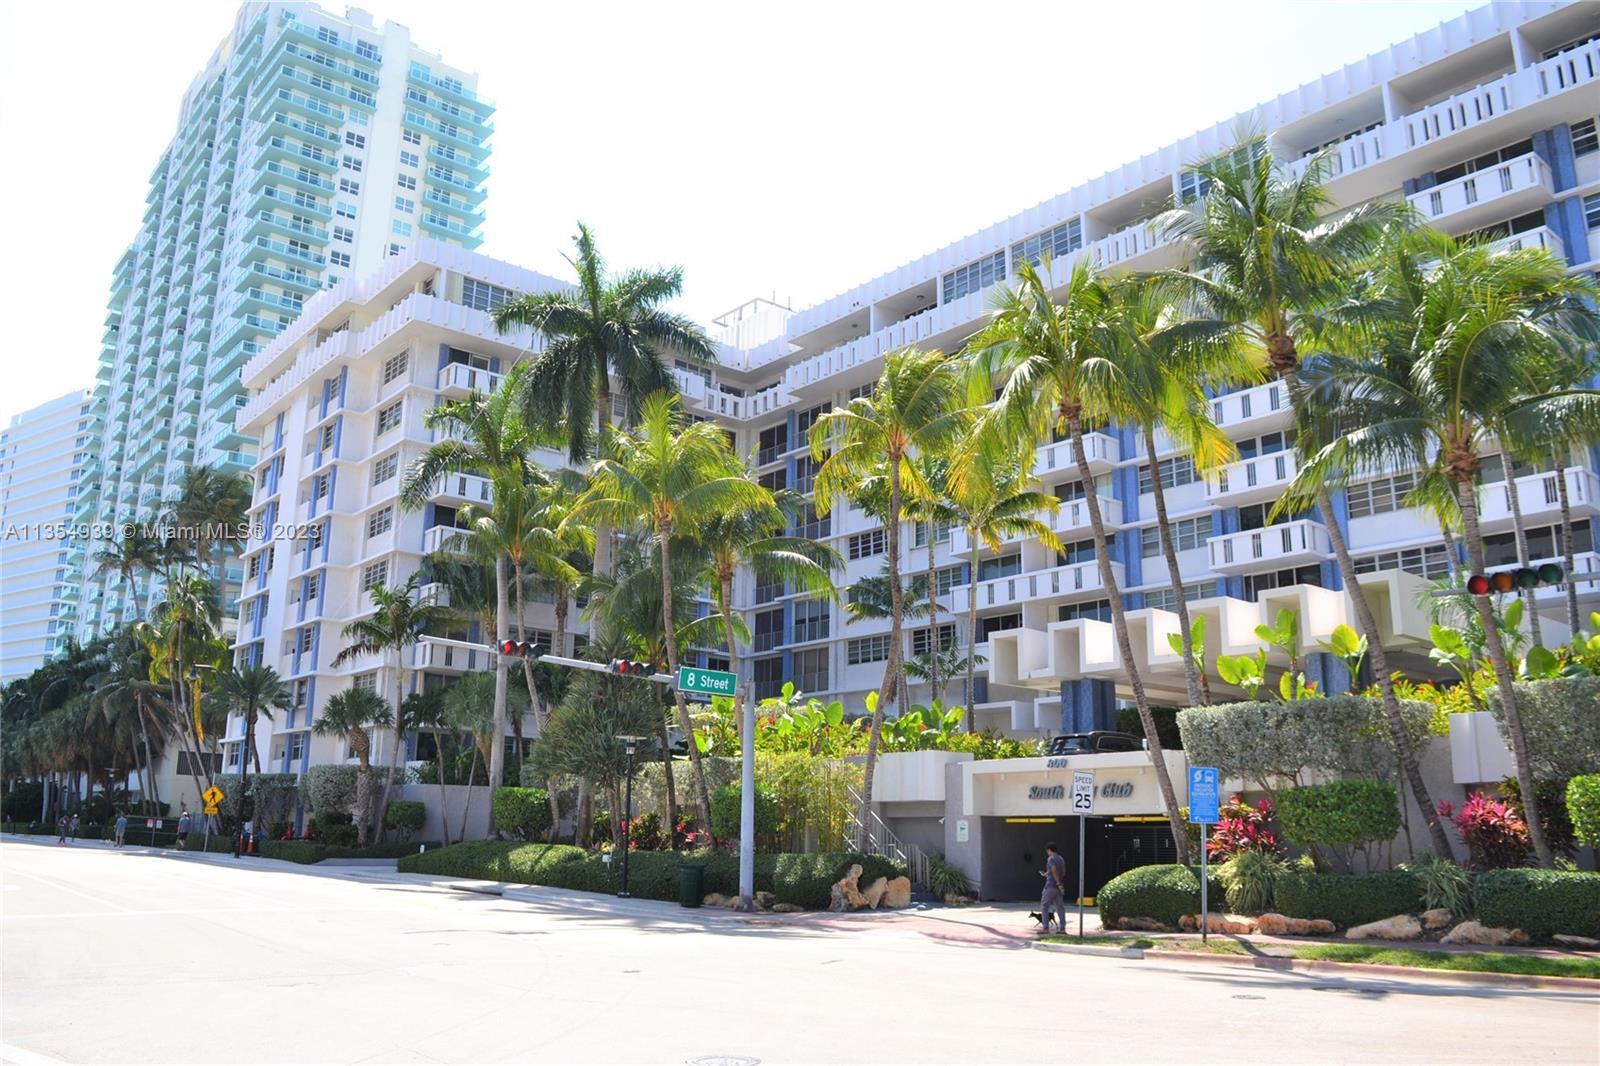 Bright, spacious 1BR with tree-lined Miami Beach view. Floor-to-ceiling sliding glass doors in livin